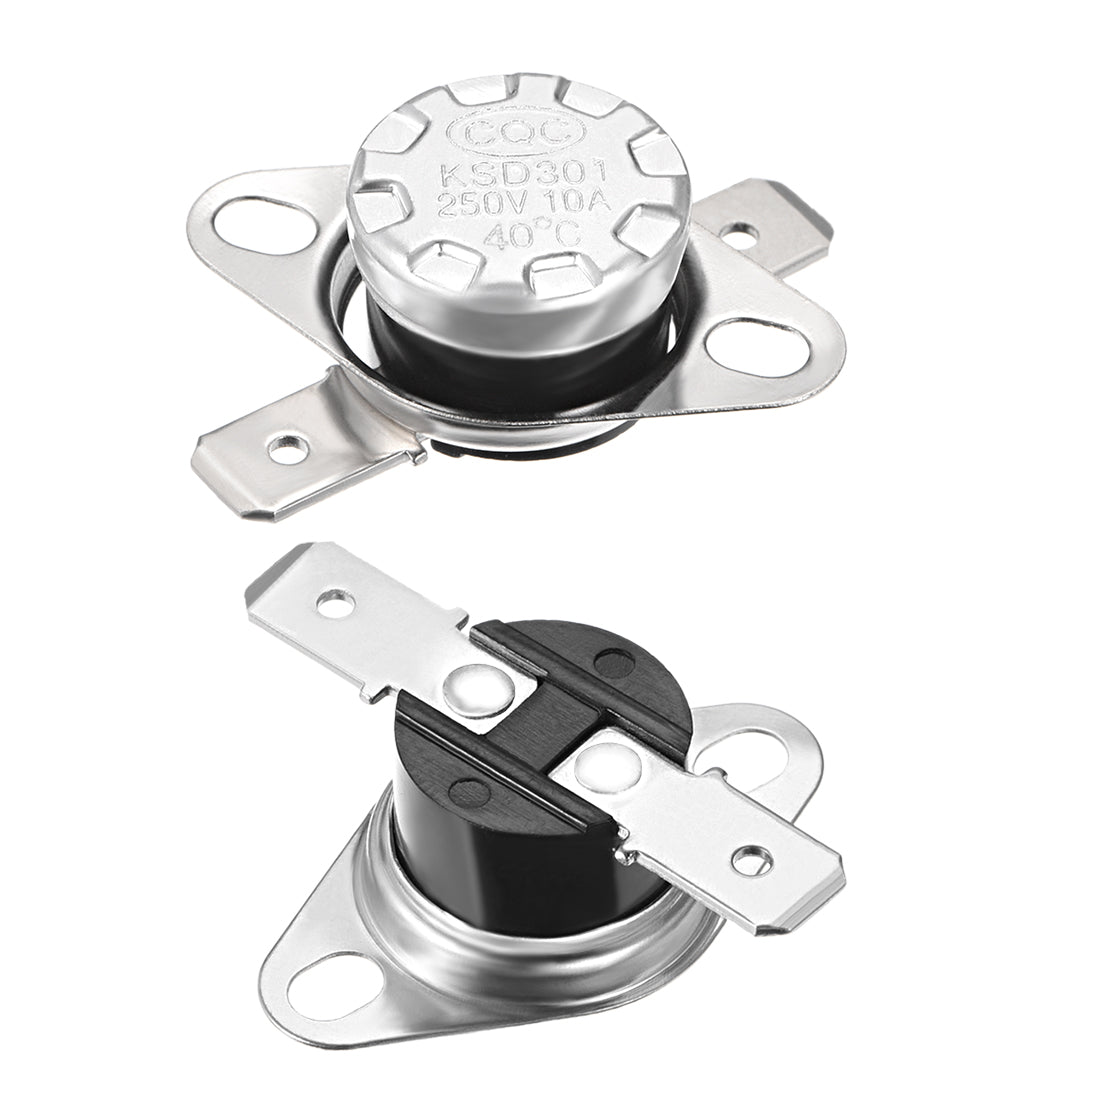 uxcell Uxcell Temperature Control Switch , Thermostat , KSD301 40°C , 10A , Normally Closed N.C 6.3mm Pin 2pcs